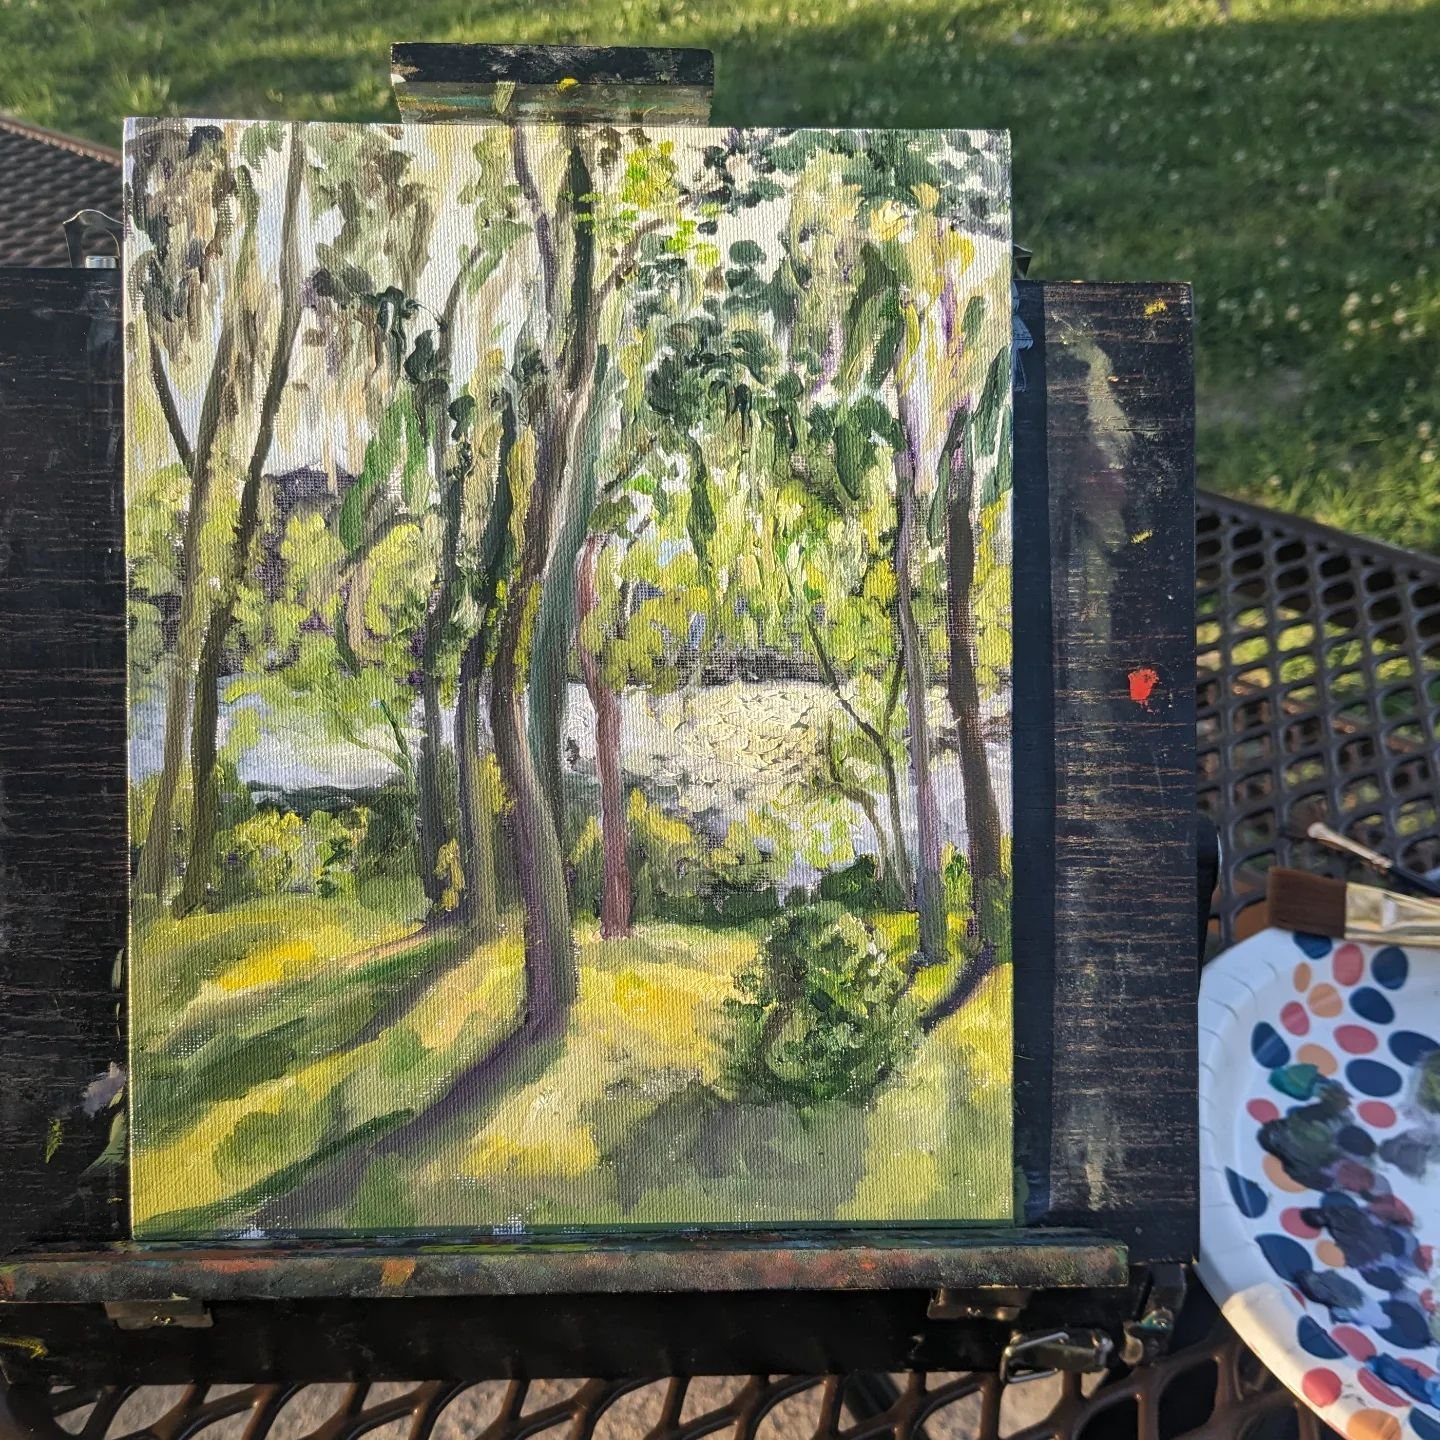 Squeezing as much as I can from #pleinairpril before it ends 🌿🌞 from yesterday afternoon! Oil on canvas panel, 10x8 in

#houstonartist #houstonart #texasart #texasparksandwildlife #abstractlandscape #emergingartist